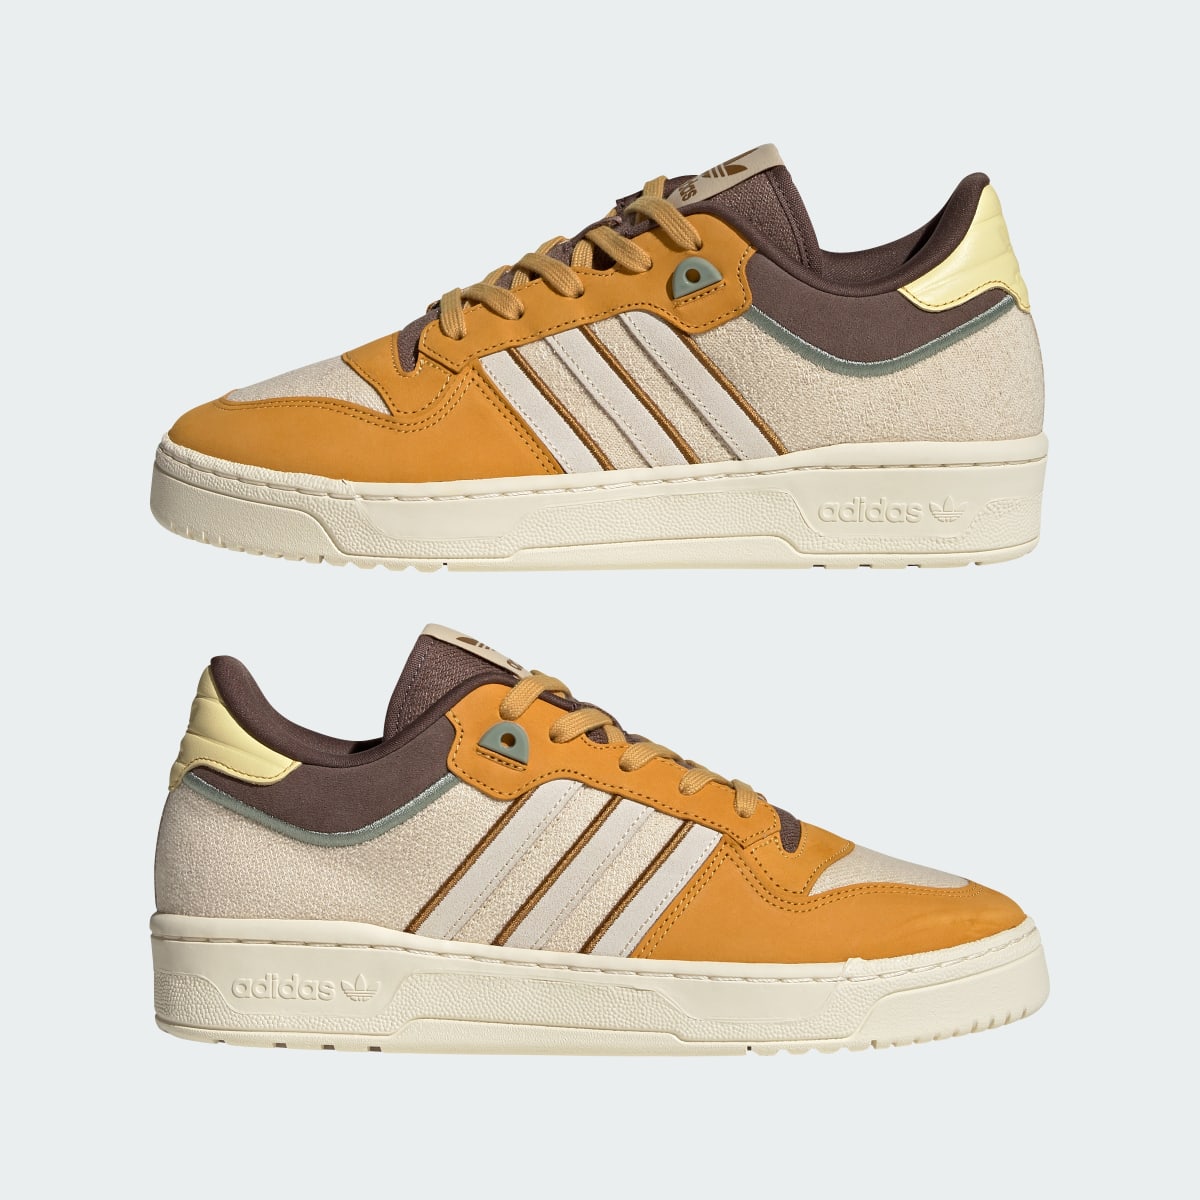 Adidas Rivalry Low 86 Basketball Shoes. 8